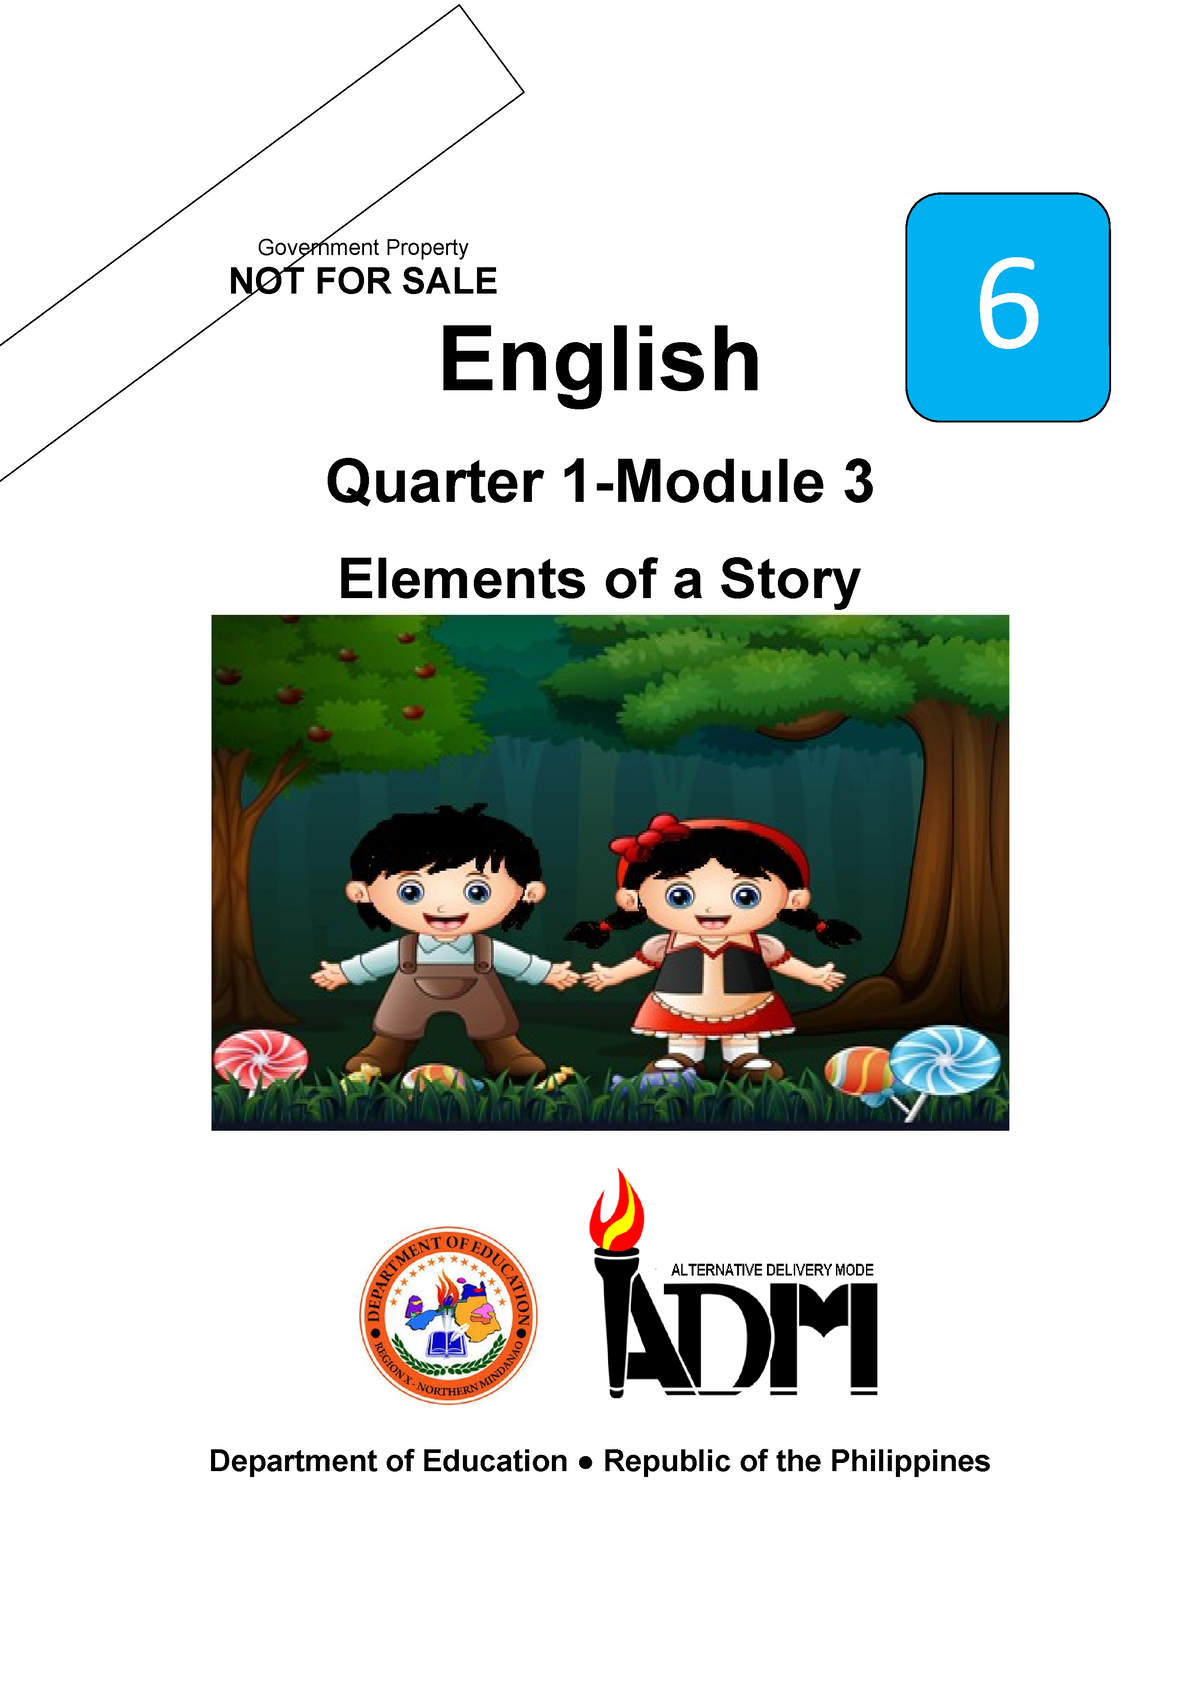 English 6 Q1 Mod3 Elements Of A Story Version 3 English Quarter 1 Module 3 Elements Of A Story 2000